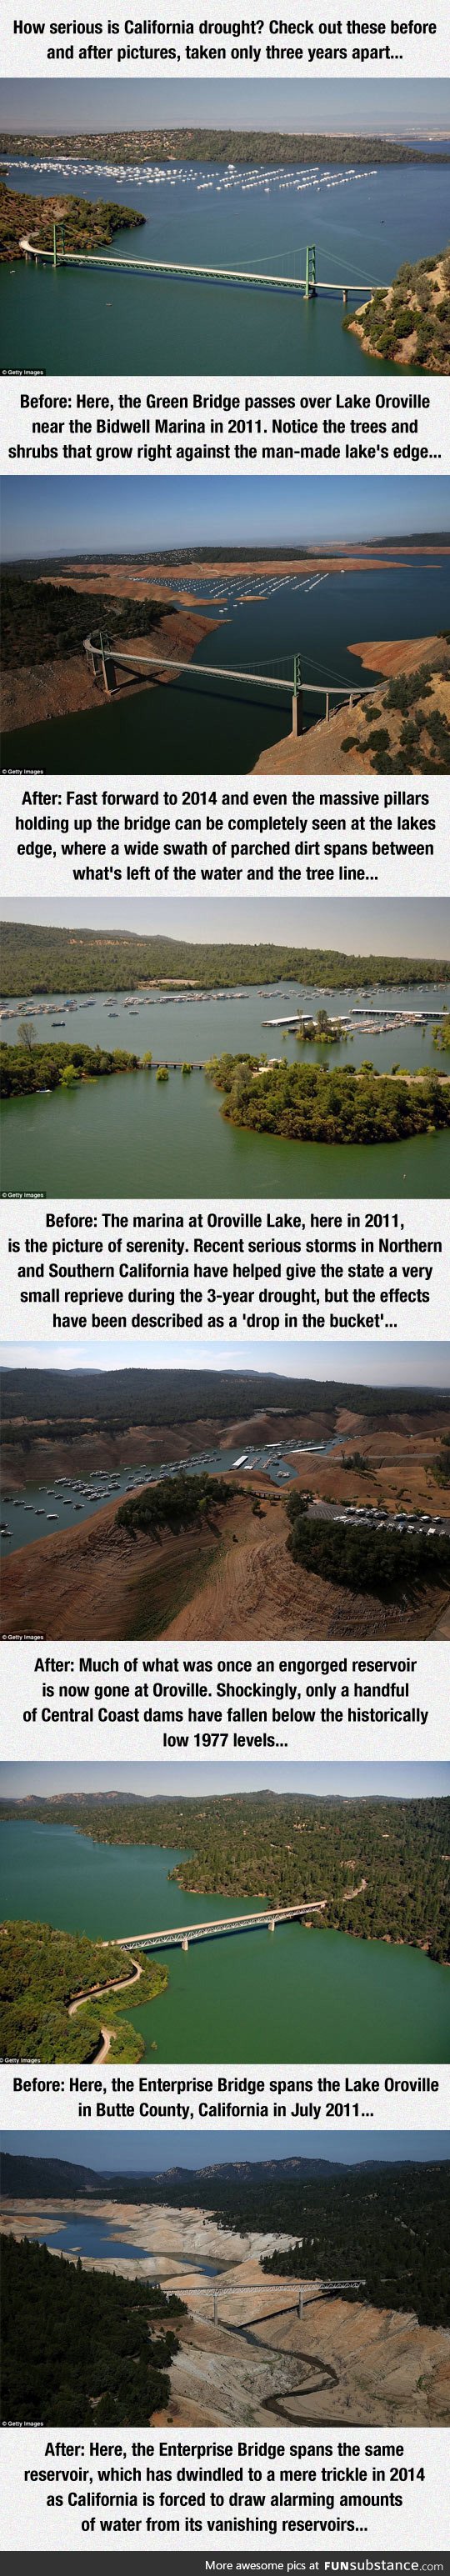 These pictures show how severe is California's Drought